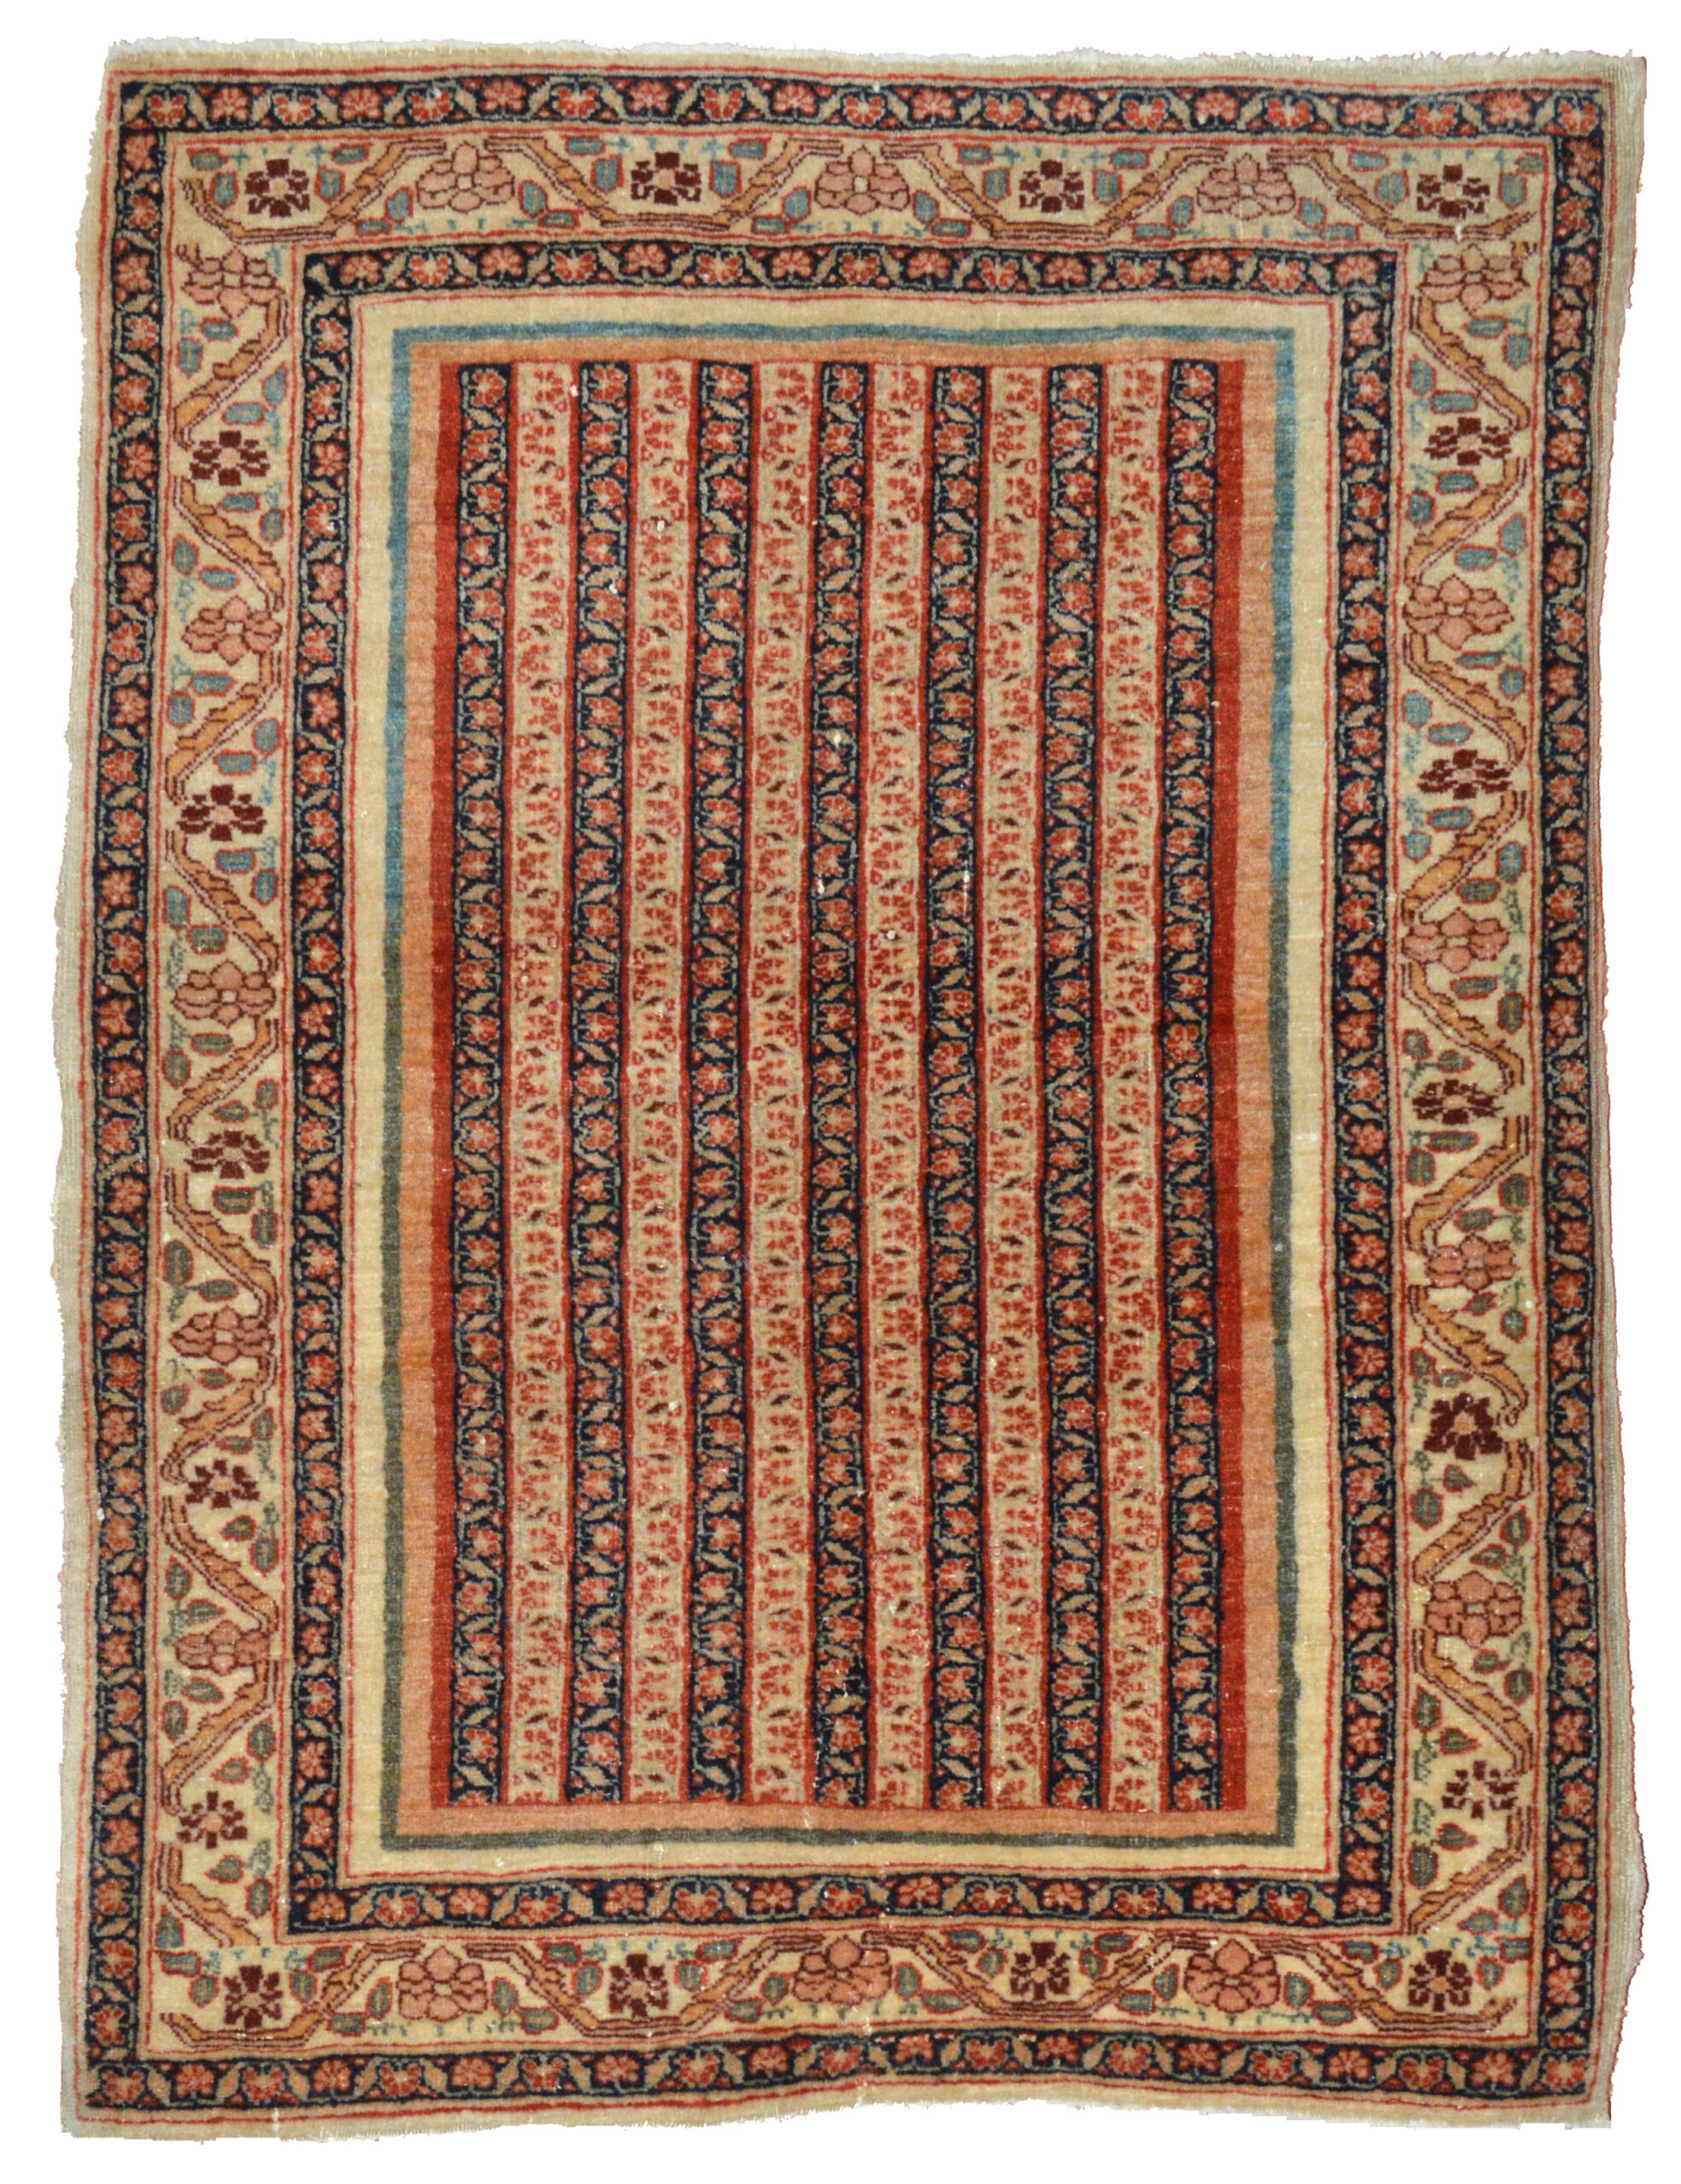 A finely woven antique Persian Tabriz rug with vertical stripes that are decorated with scrolling vines and flowers. A wide, ivory border frames the field. Northwest Persia, circa 1895. Douglas Stock Gallery is one of America's most selective dealers in antique Oriental rugs and antique Persian carpets, antique rugs Boston,MA area, New England, antique rugs by appointment New York, antique rugs Washington DC